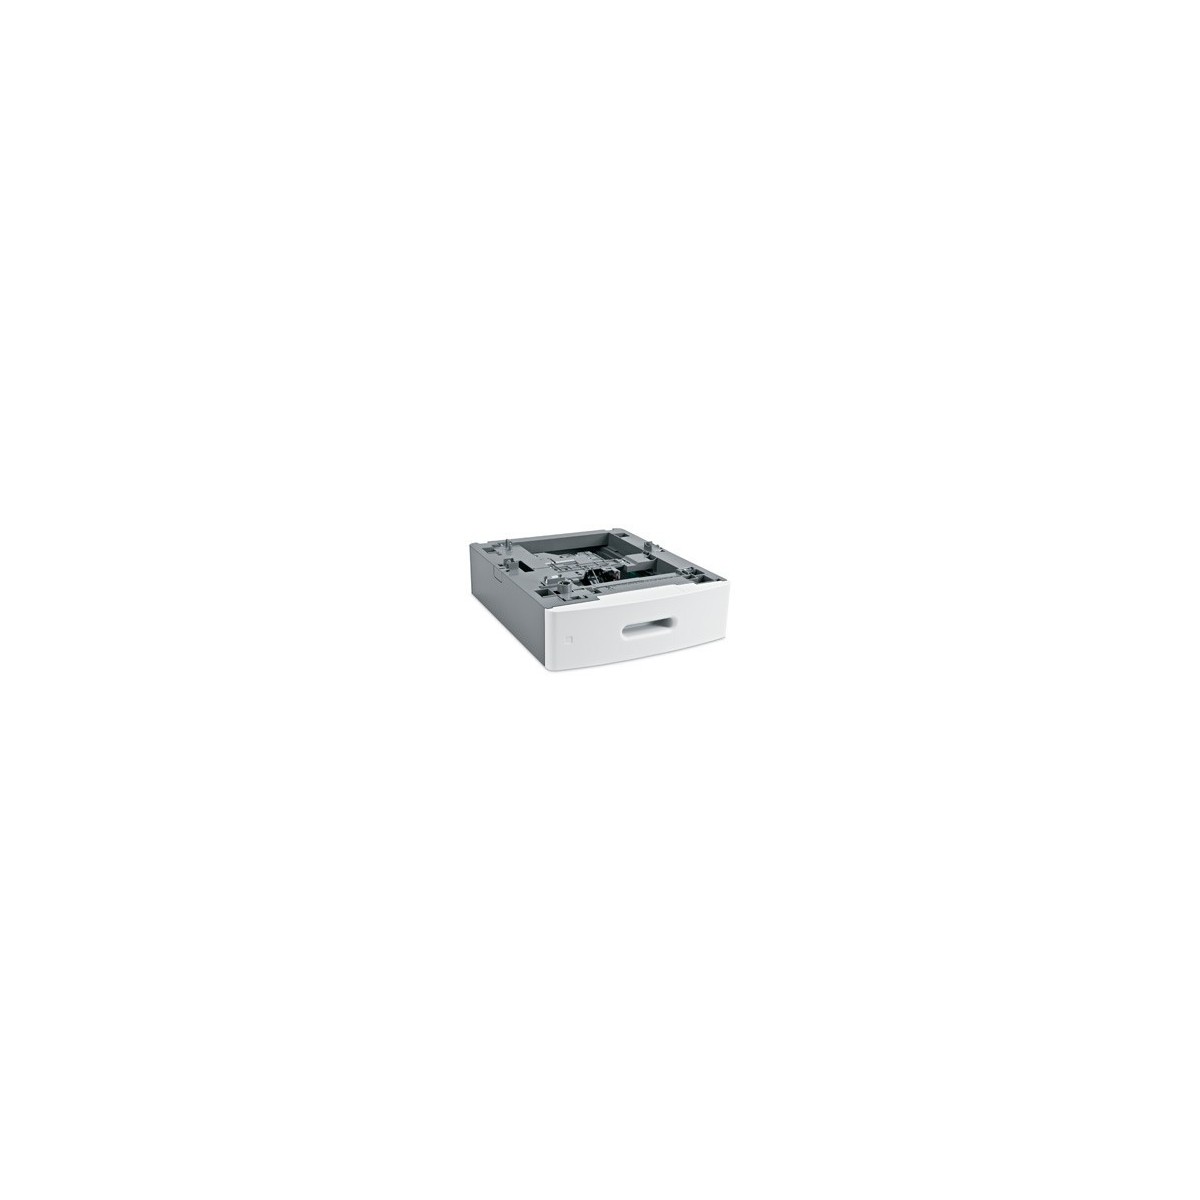 Lexmark 550-Sheet Drawer - 550 sheets - Card Stock - Plain Paper - Card Stock  Label Guide - A4 - A5 - Executive - Folio - State